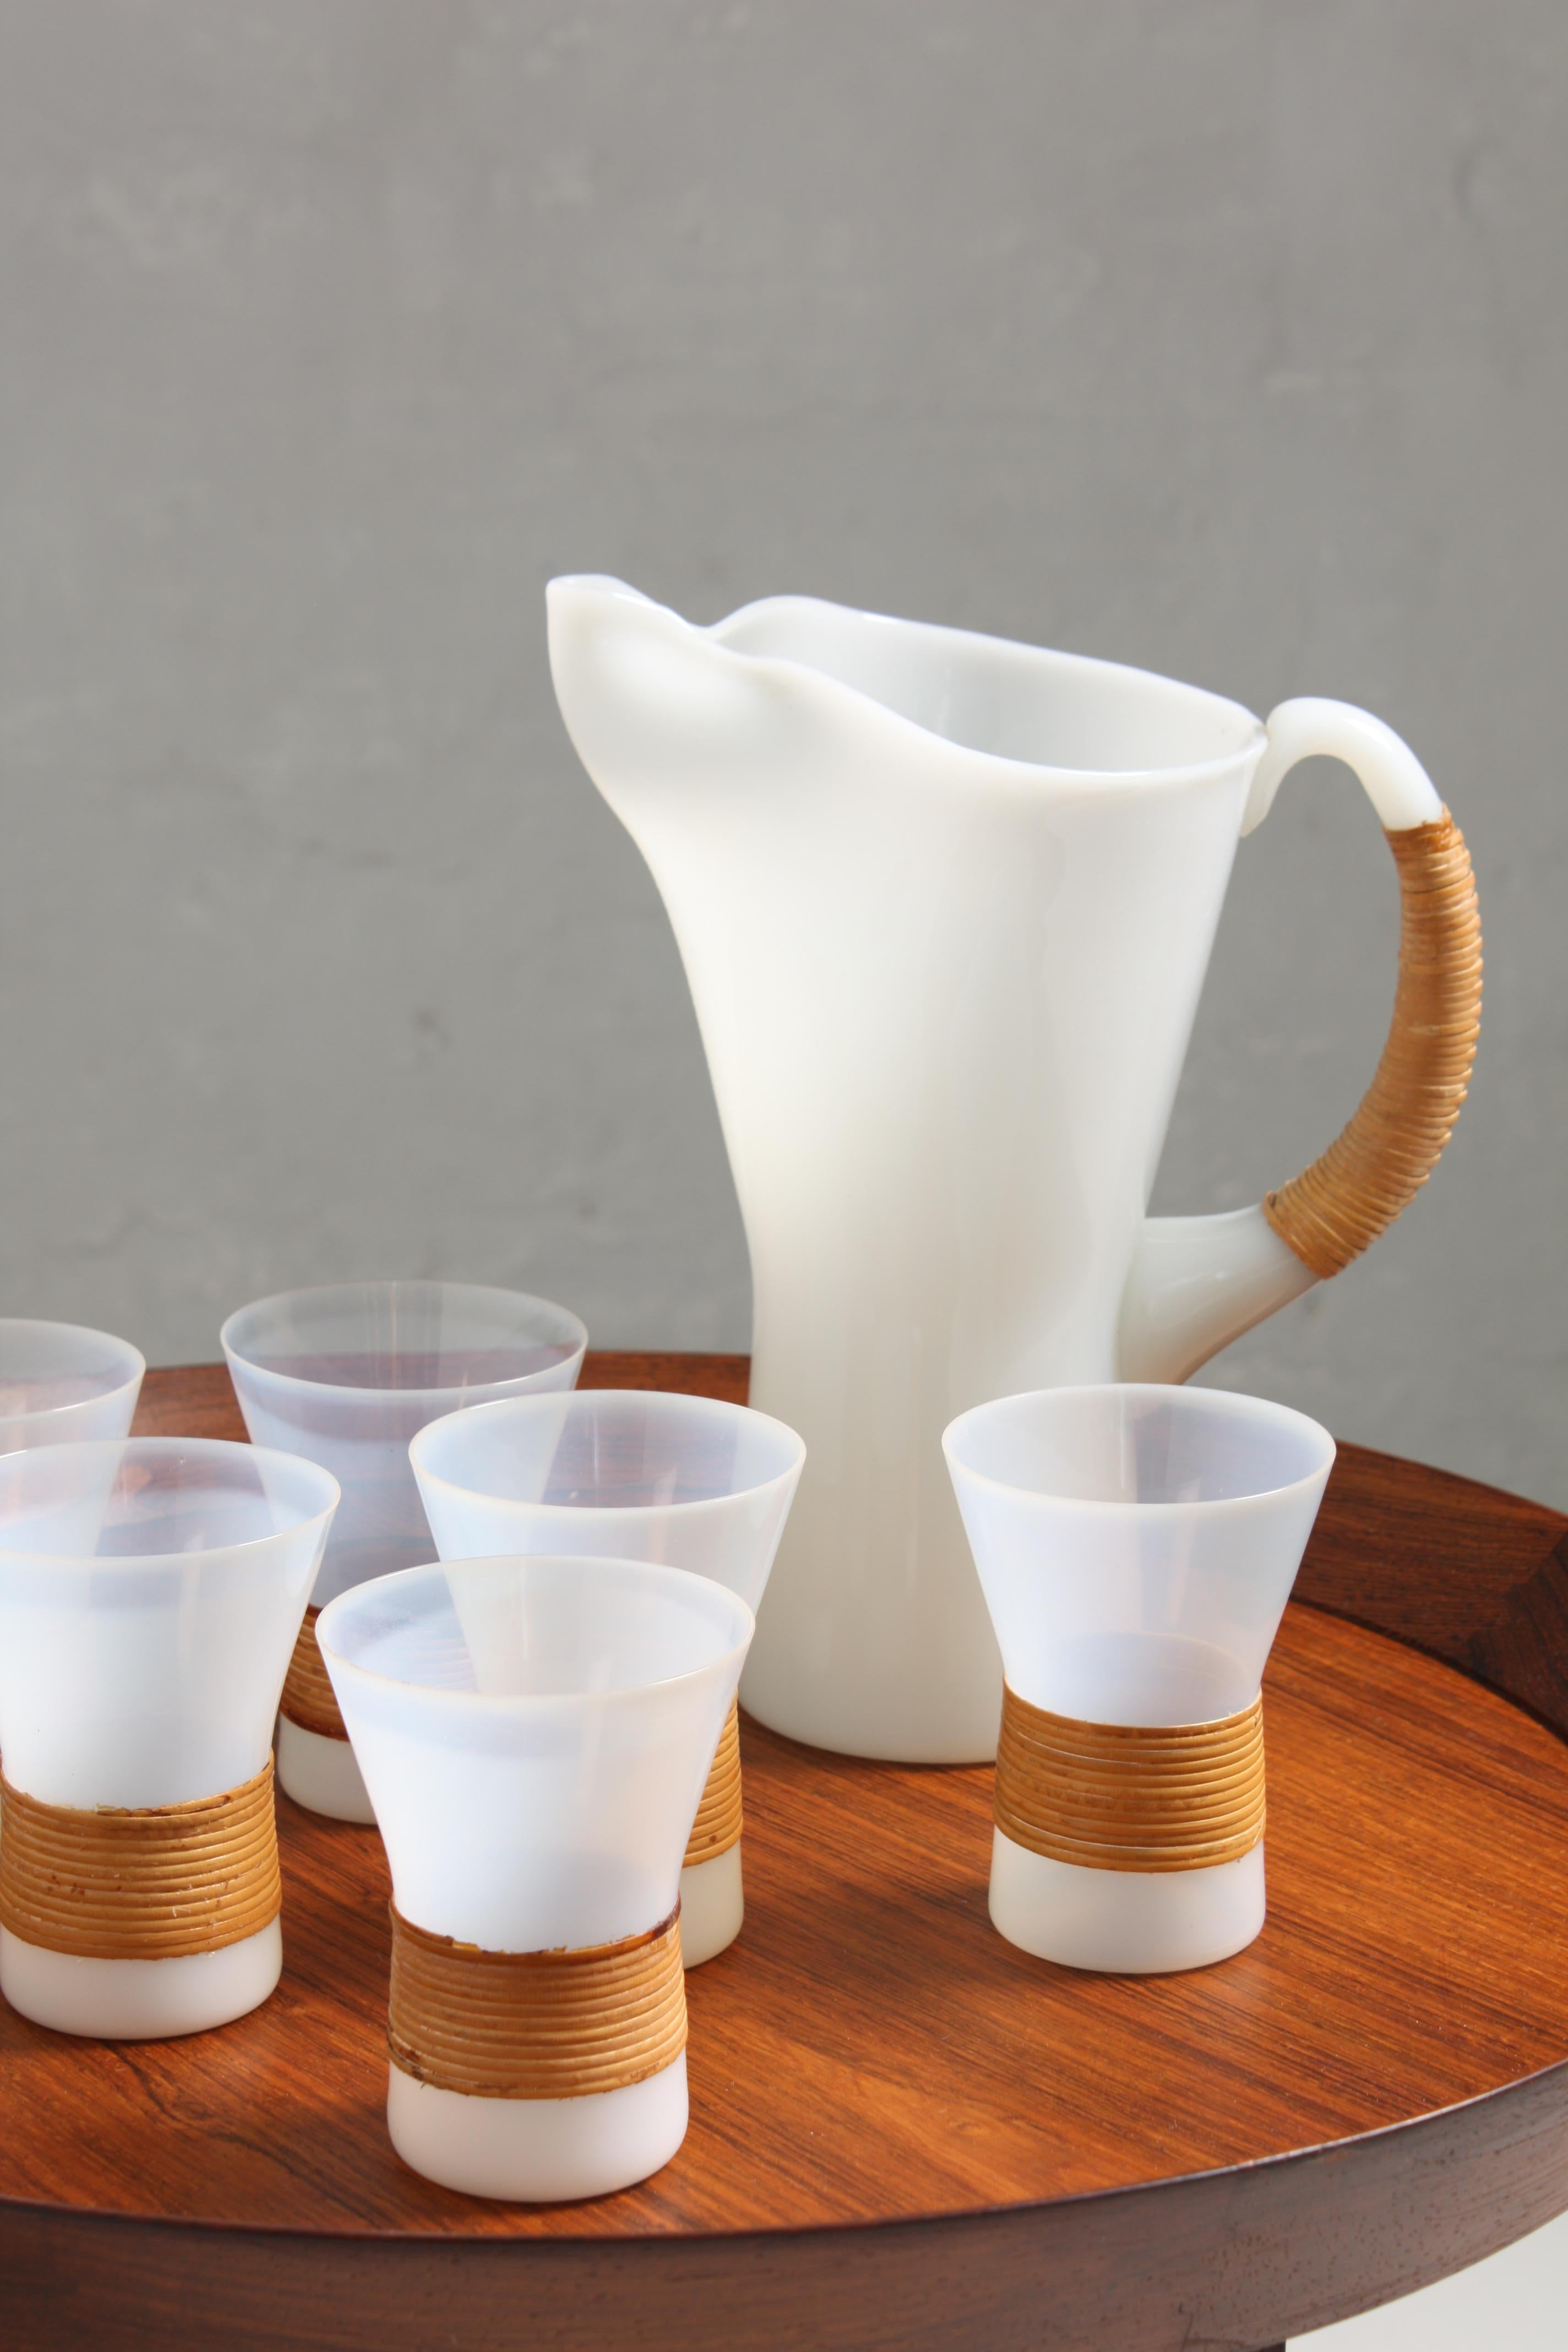 Bamboo Midcentury Drink Pitcher and Six Glass by Jacob E. Bang, Danish Modern, 1950s